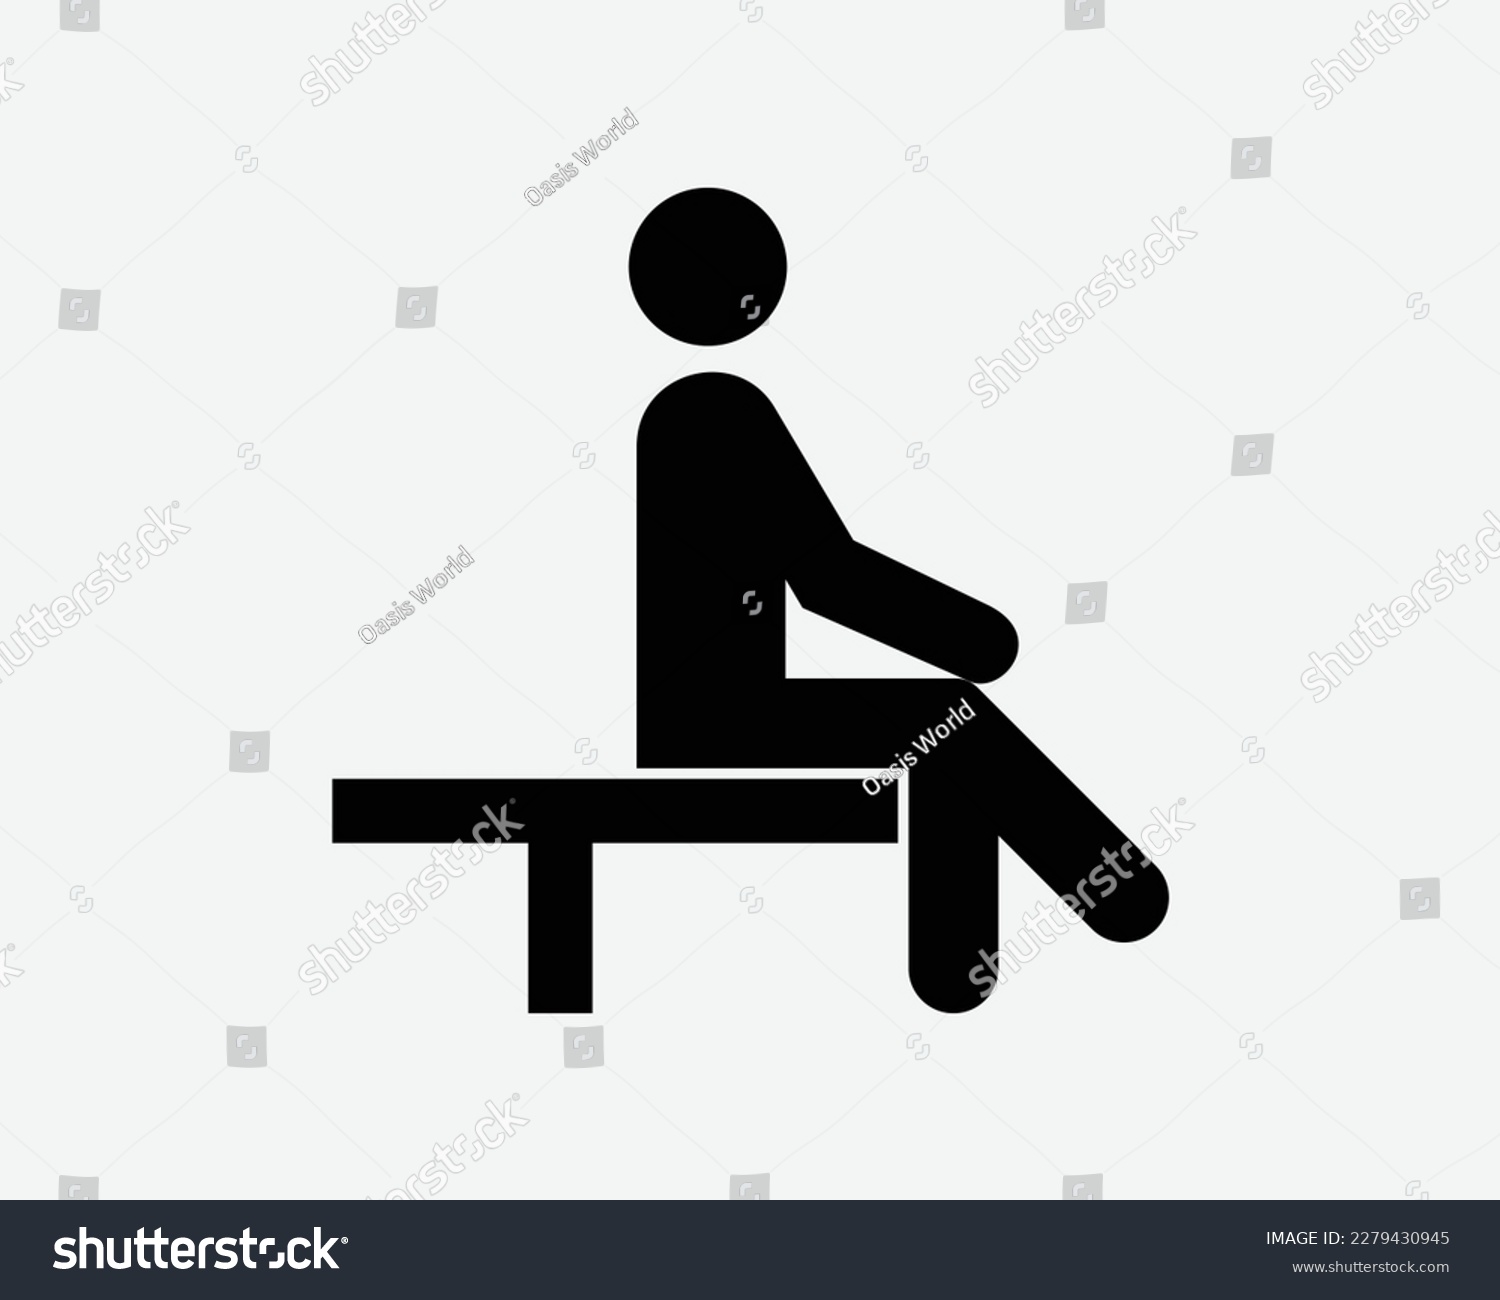 SVG of Man Sitting Sit Bench Chair Cross Leg Resting Rest Thinking Icon Black White Silhouette Symbol Sign Graphic Clipart Artwork Illustration Pictogram Vector svg